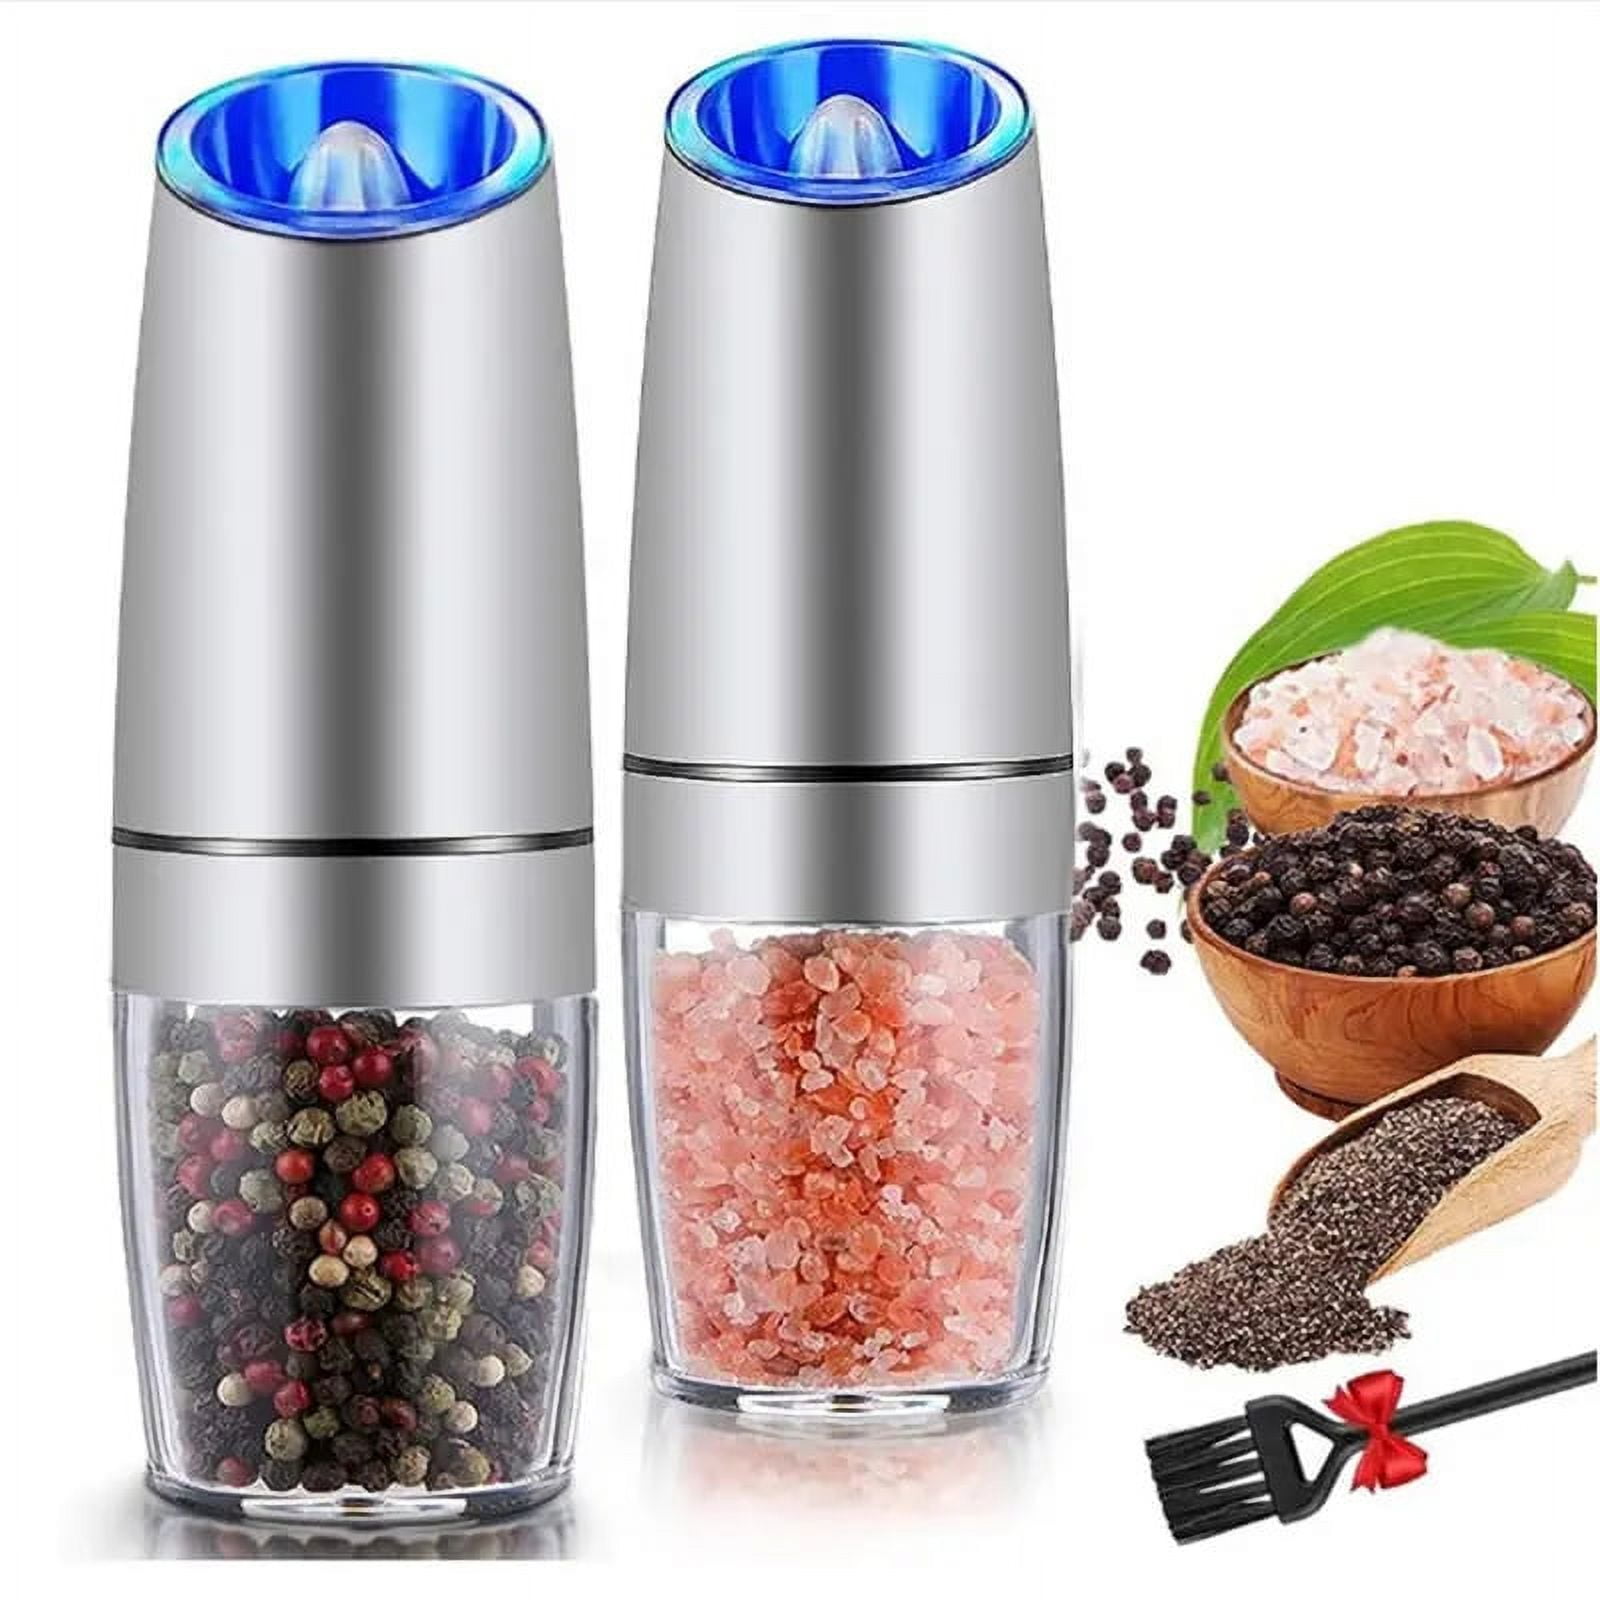 Automatic Pepper Mill Grinder Set Battery Powered with Adjustable Coarseness,2 Pack (Set of 2) SC0GO Color: Silver